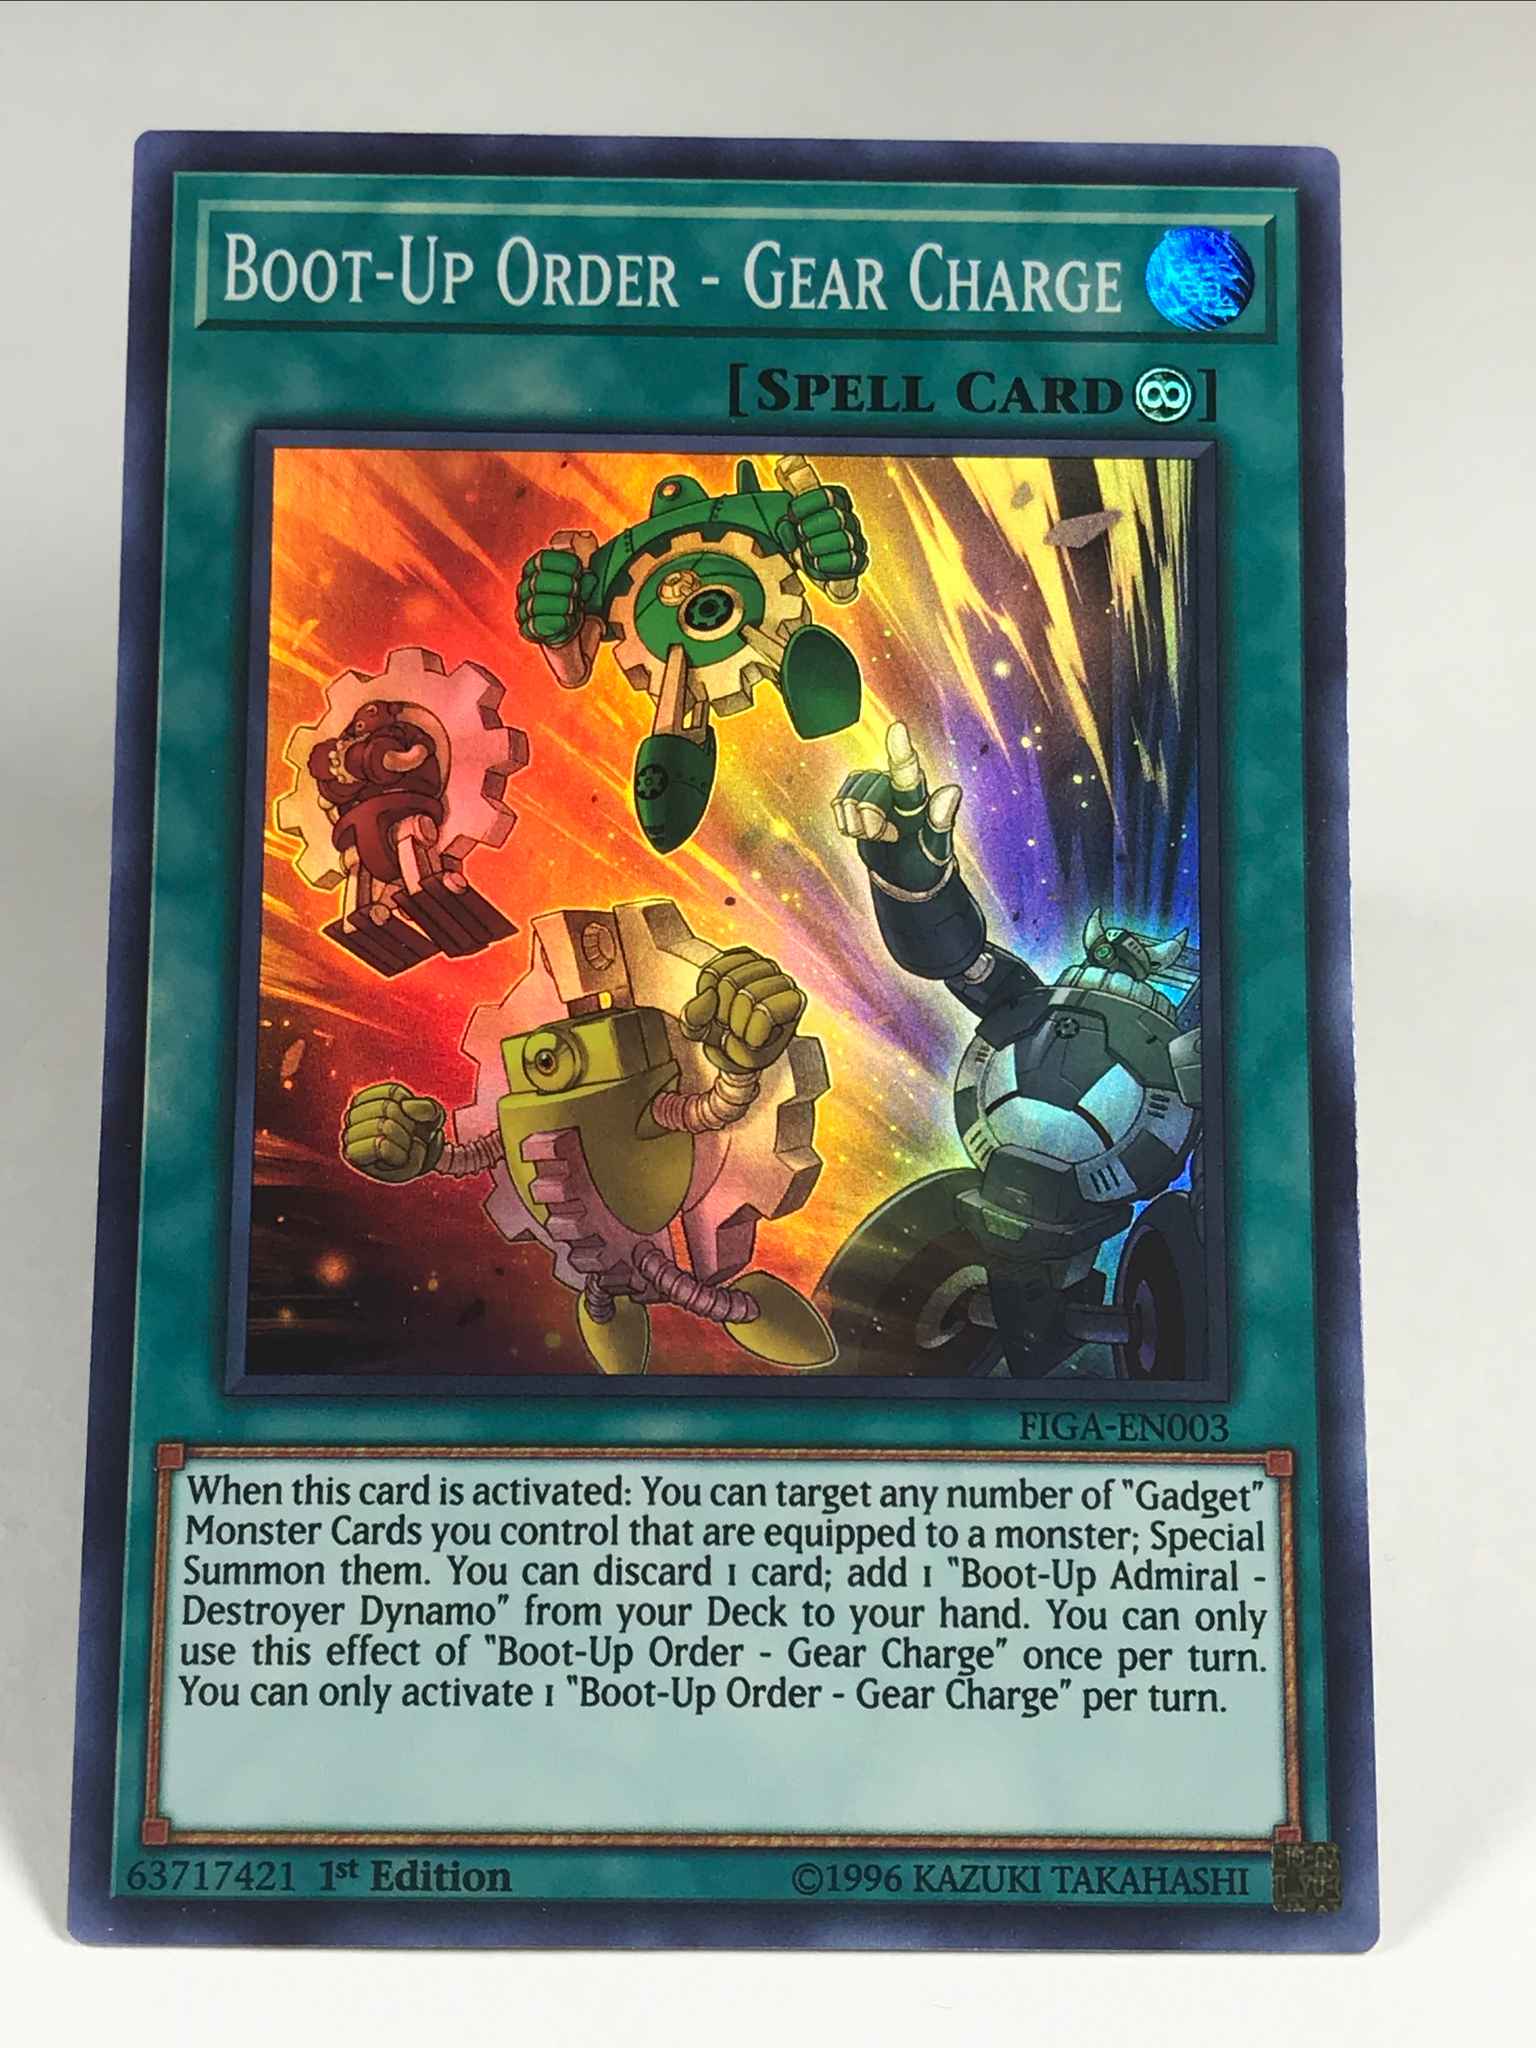 SUPER  1ST EDITION 3 X  BOOT-UP ORDER YUGIOH GEAR CHARGE  FIGA-EN003